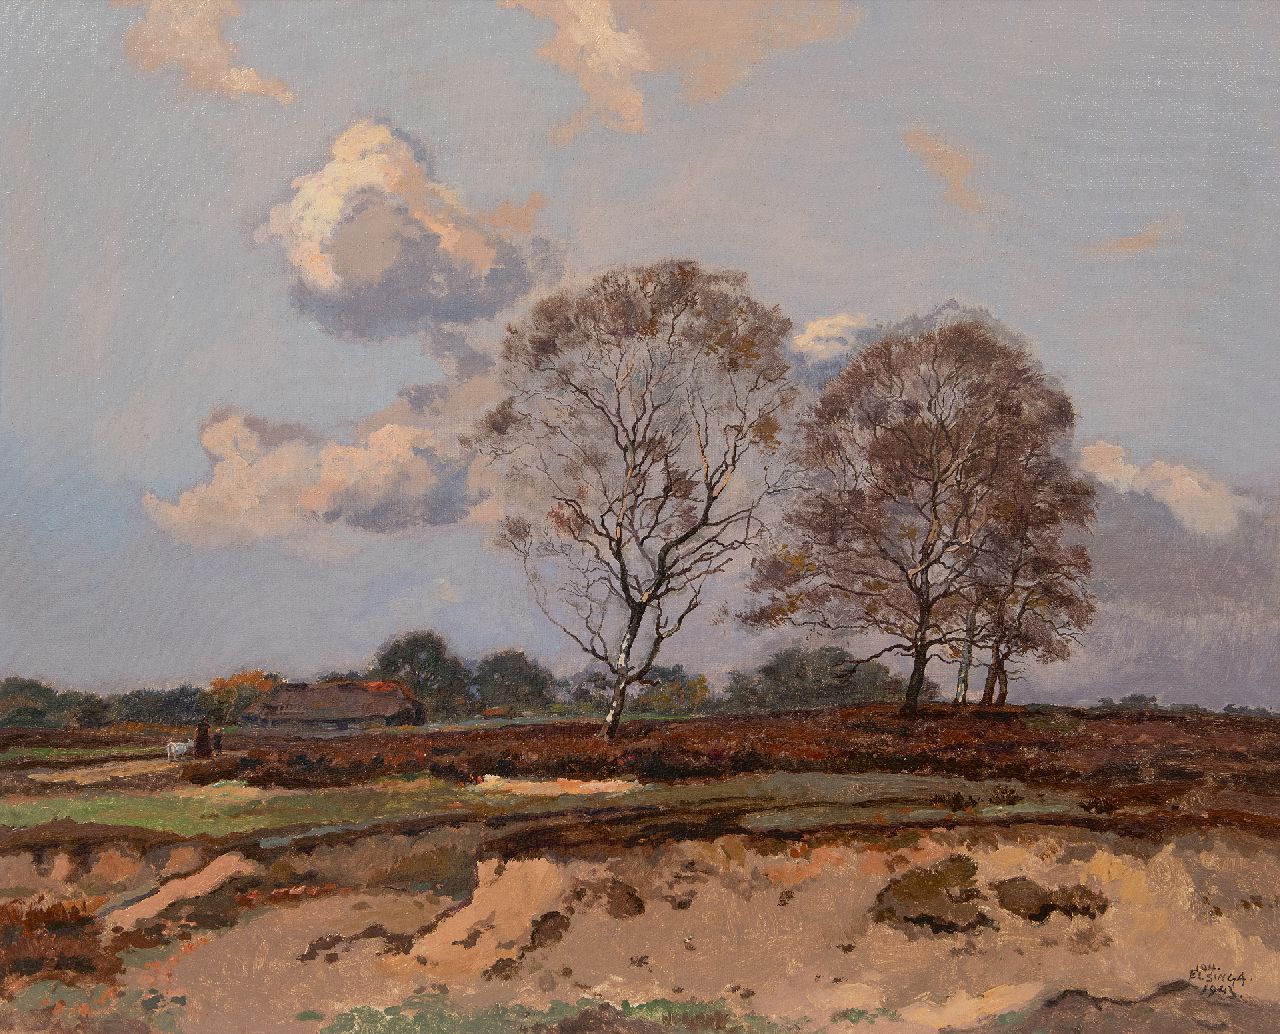 Elsinga J.  | Johannes 'Joh' Elsinga | Paintings offered for sale | Veluwe landscape near Ede, Nieuw Reemst., oil on canvas 46.4 x 56.3 cm, signed l.r. and dated 1943